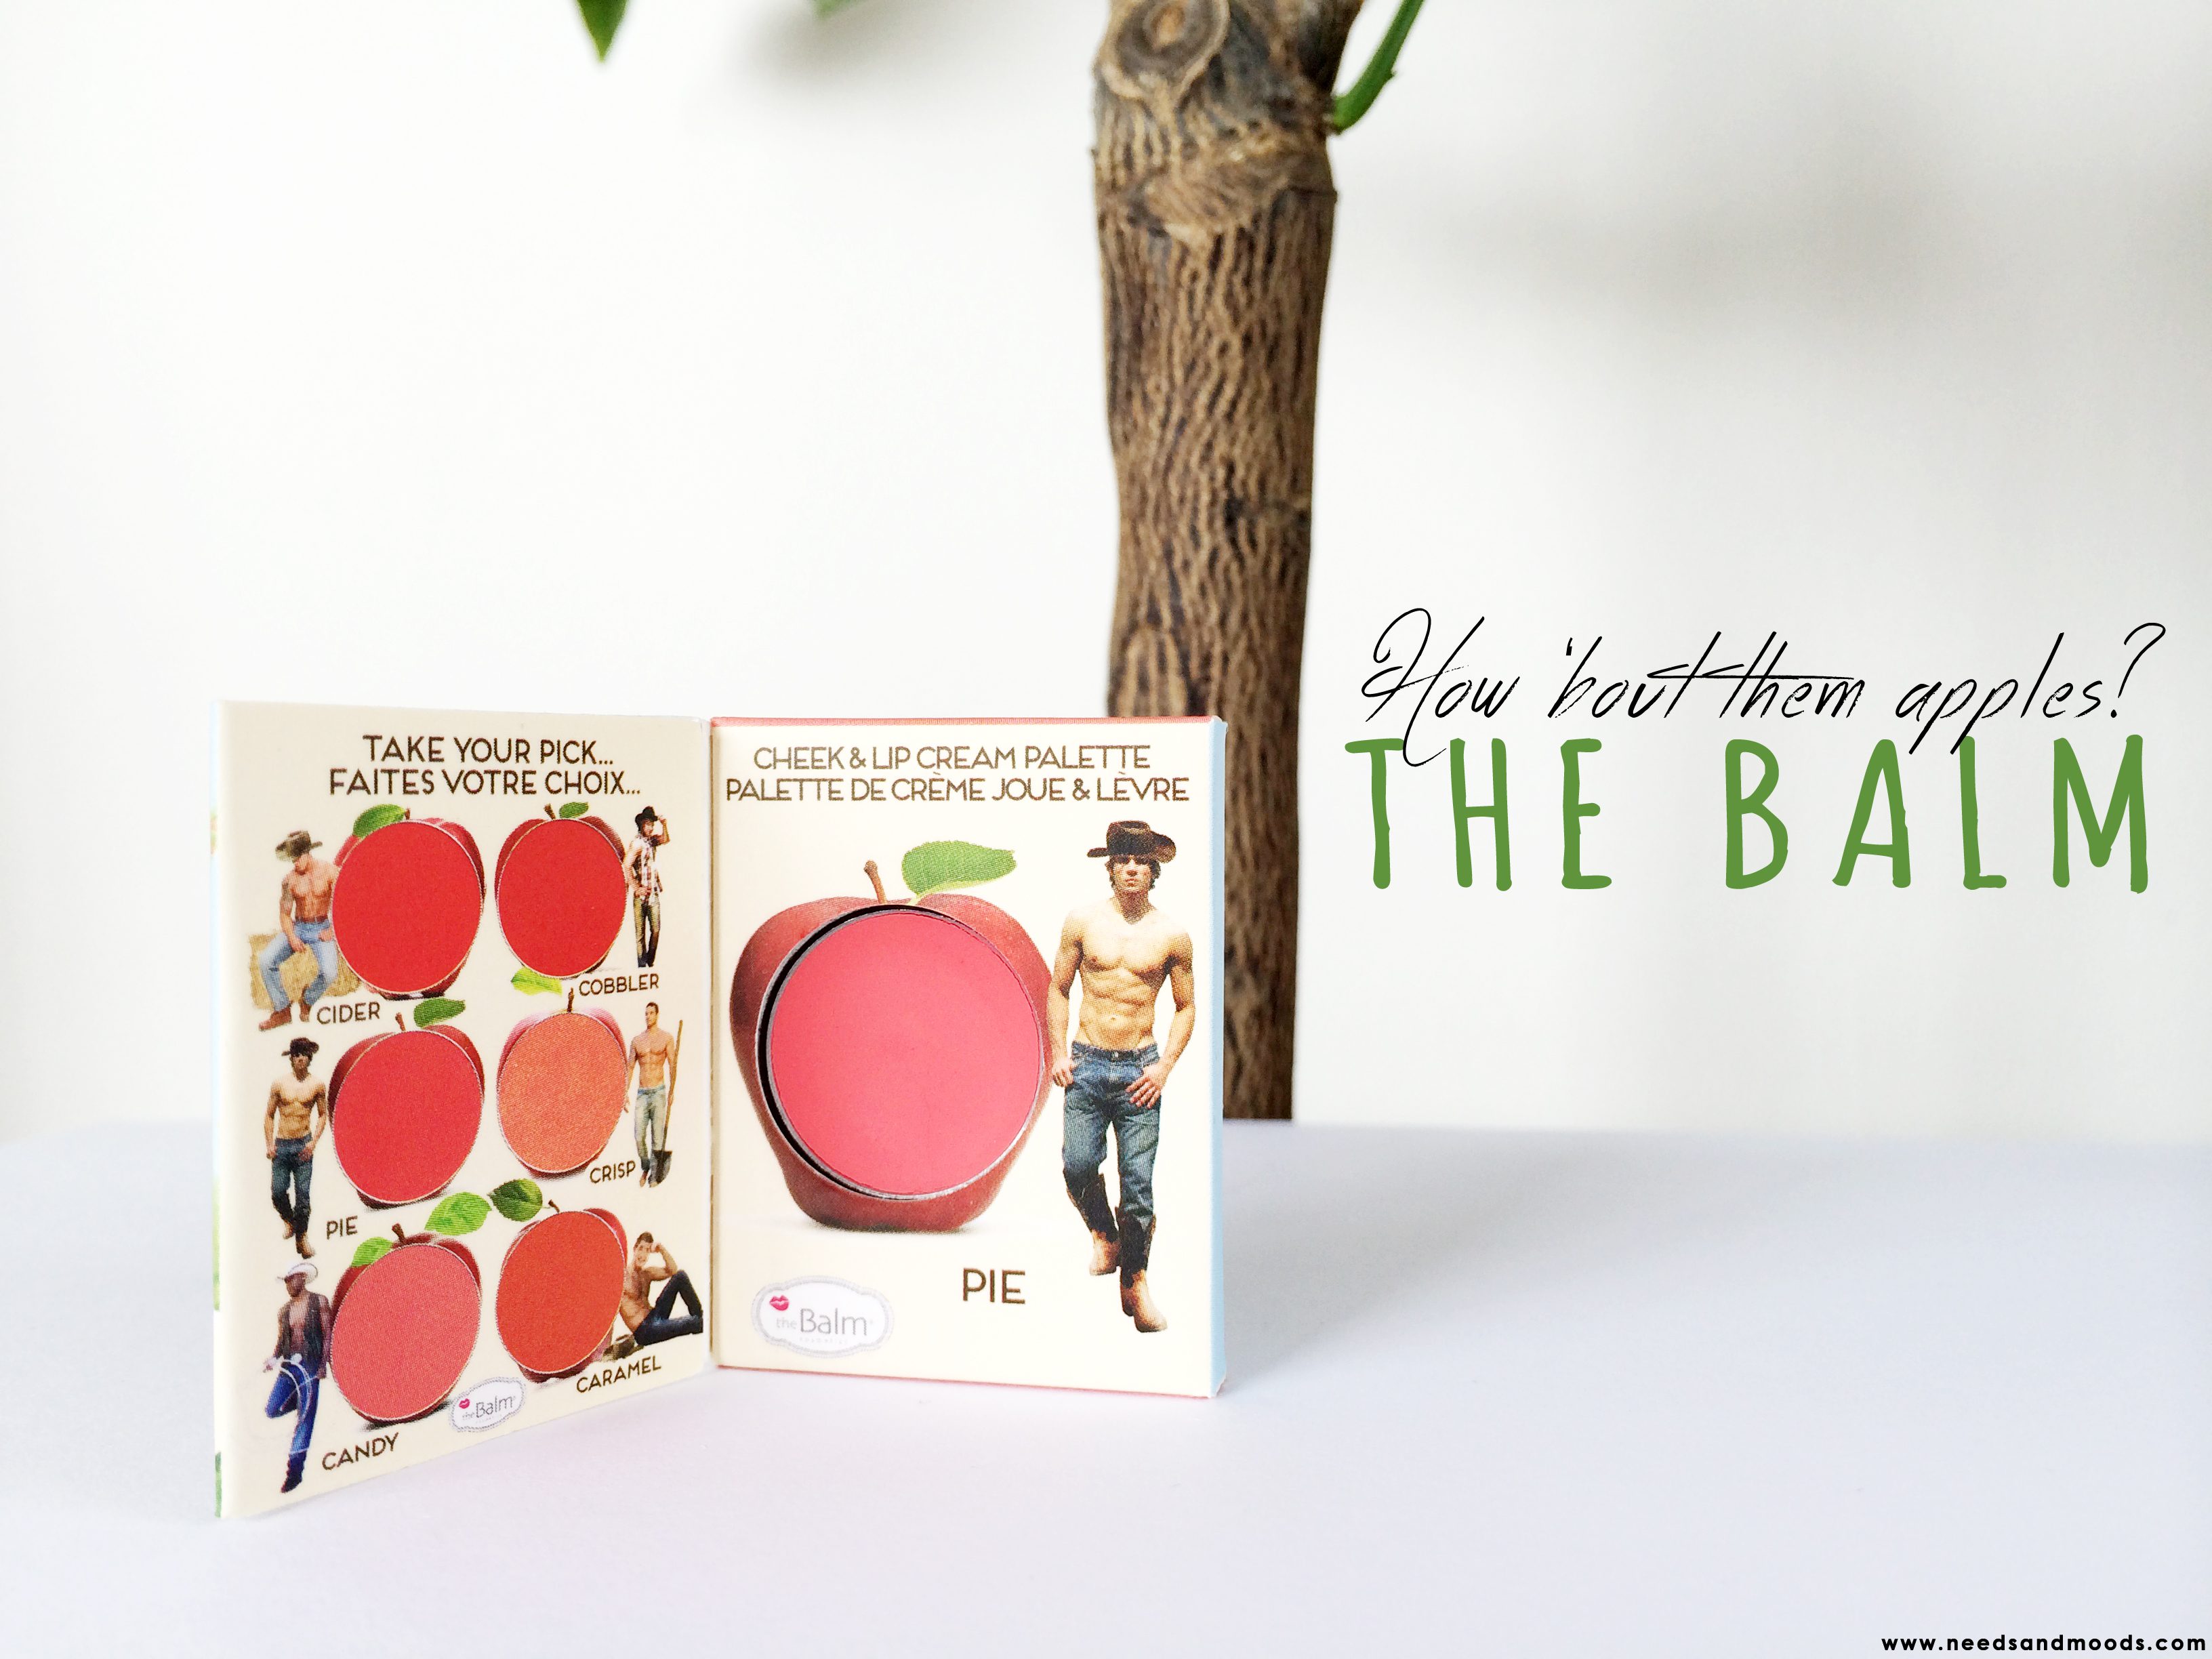 thebalm How about them apples 